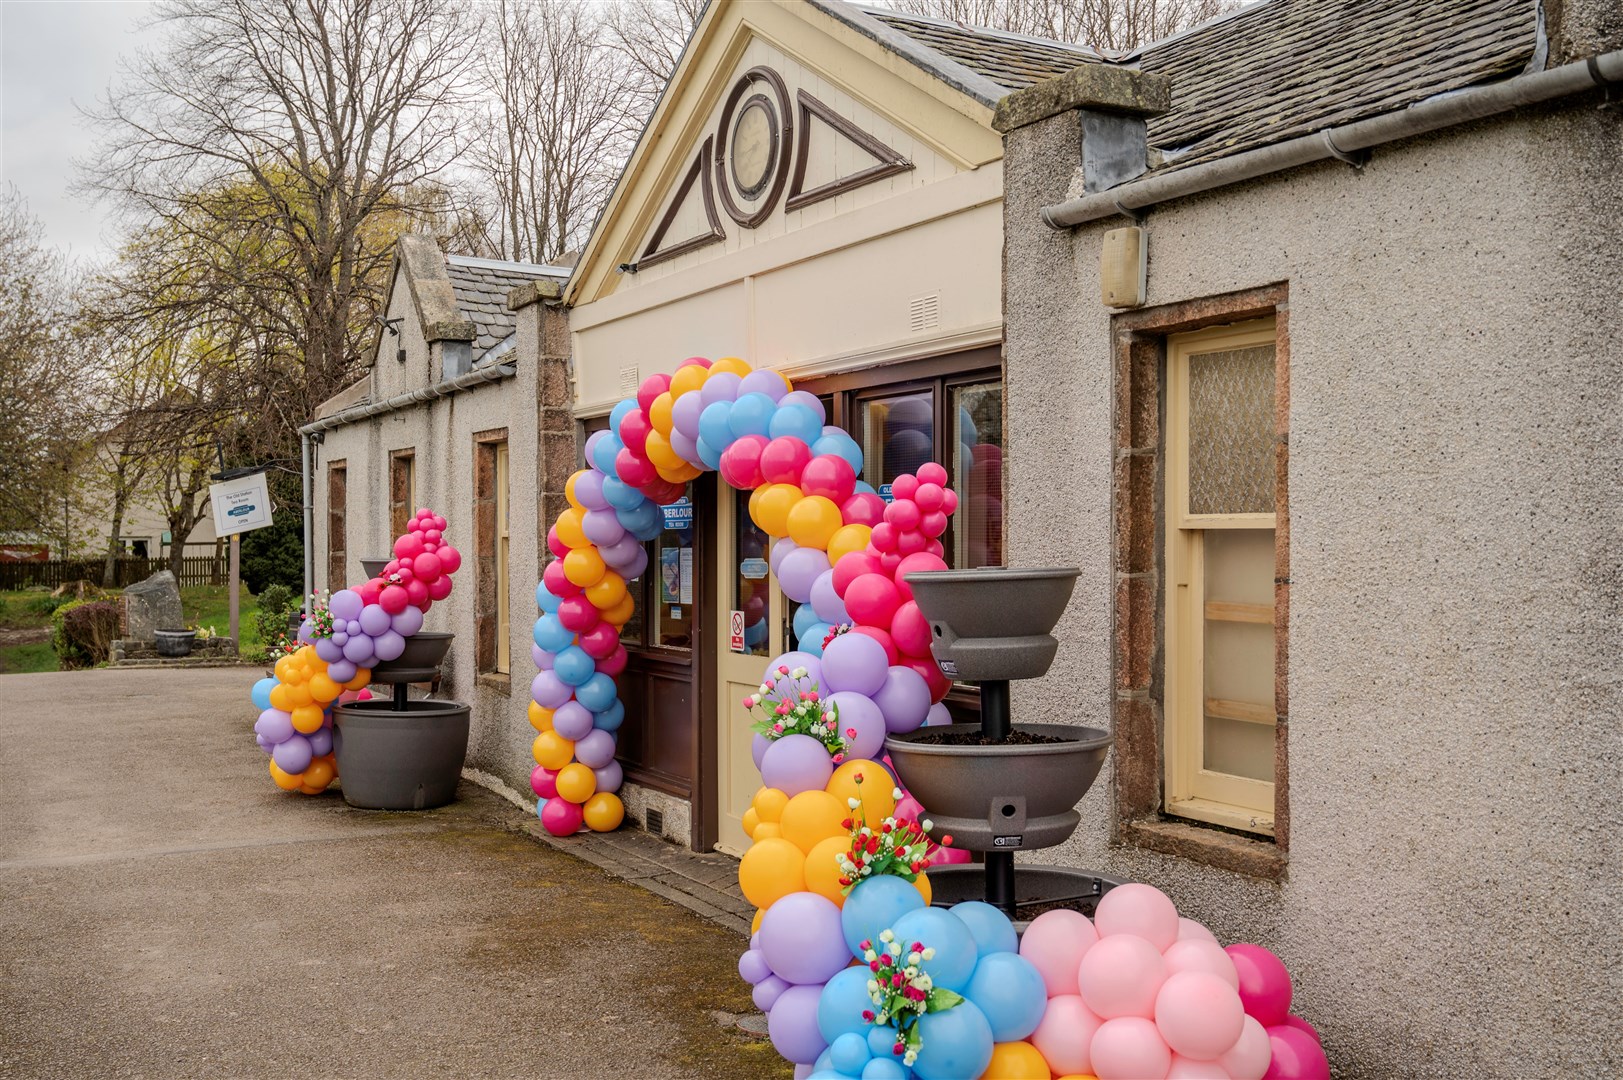 Decorations supplied by Beautiful Balloons and Blooms